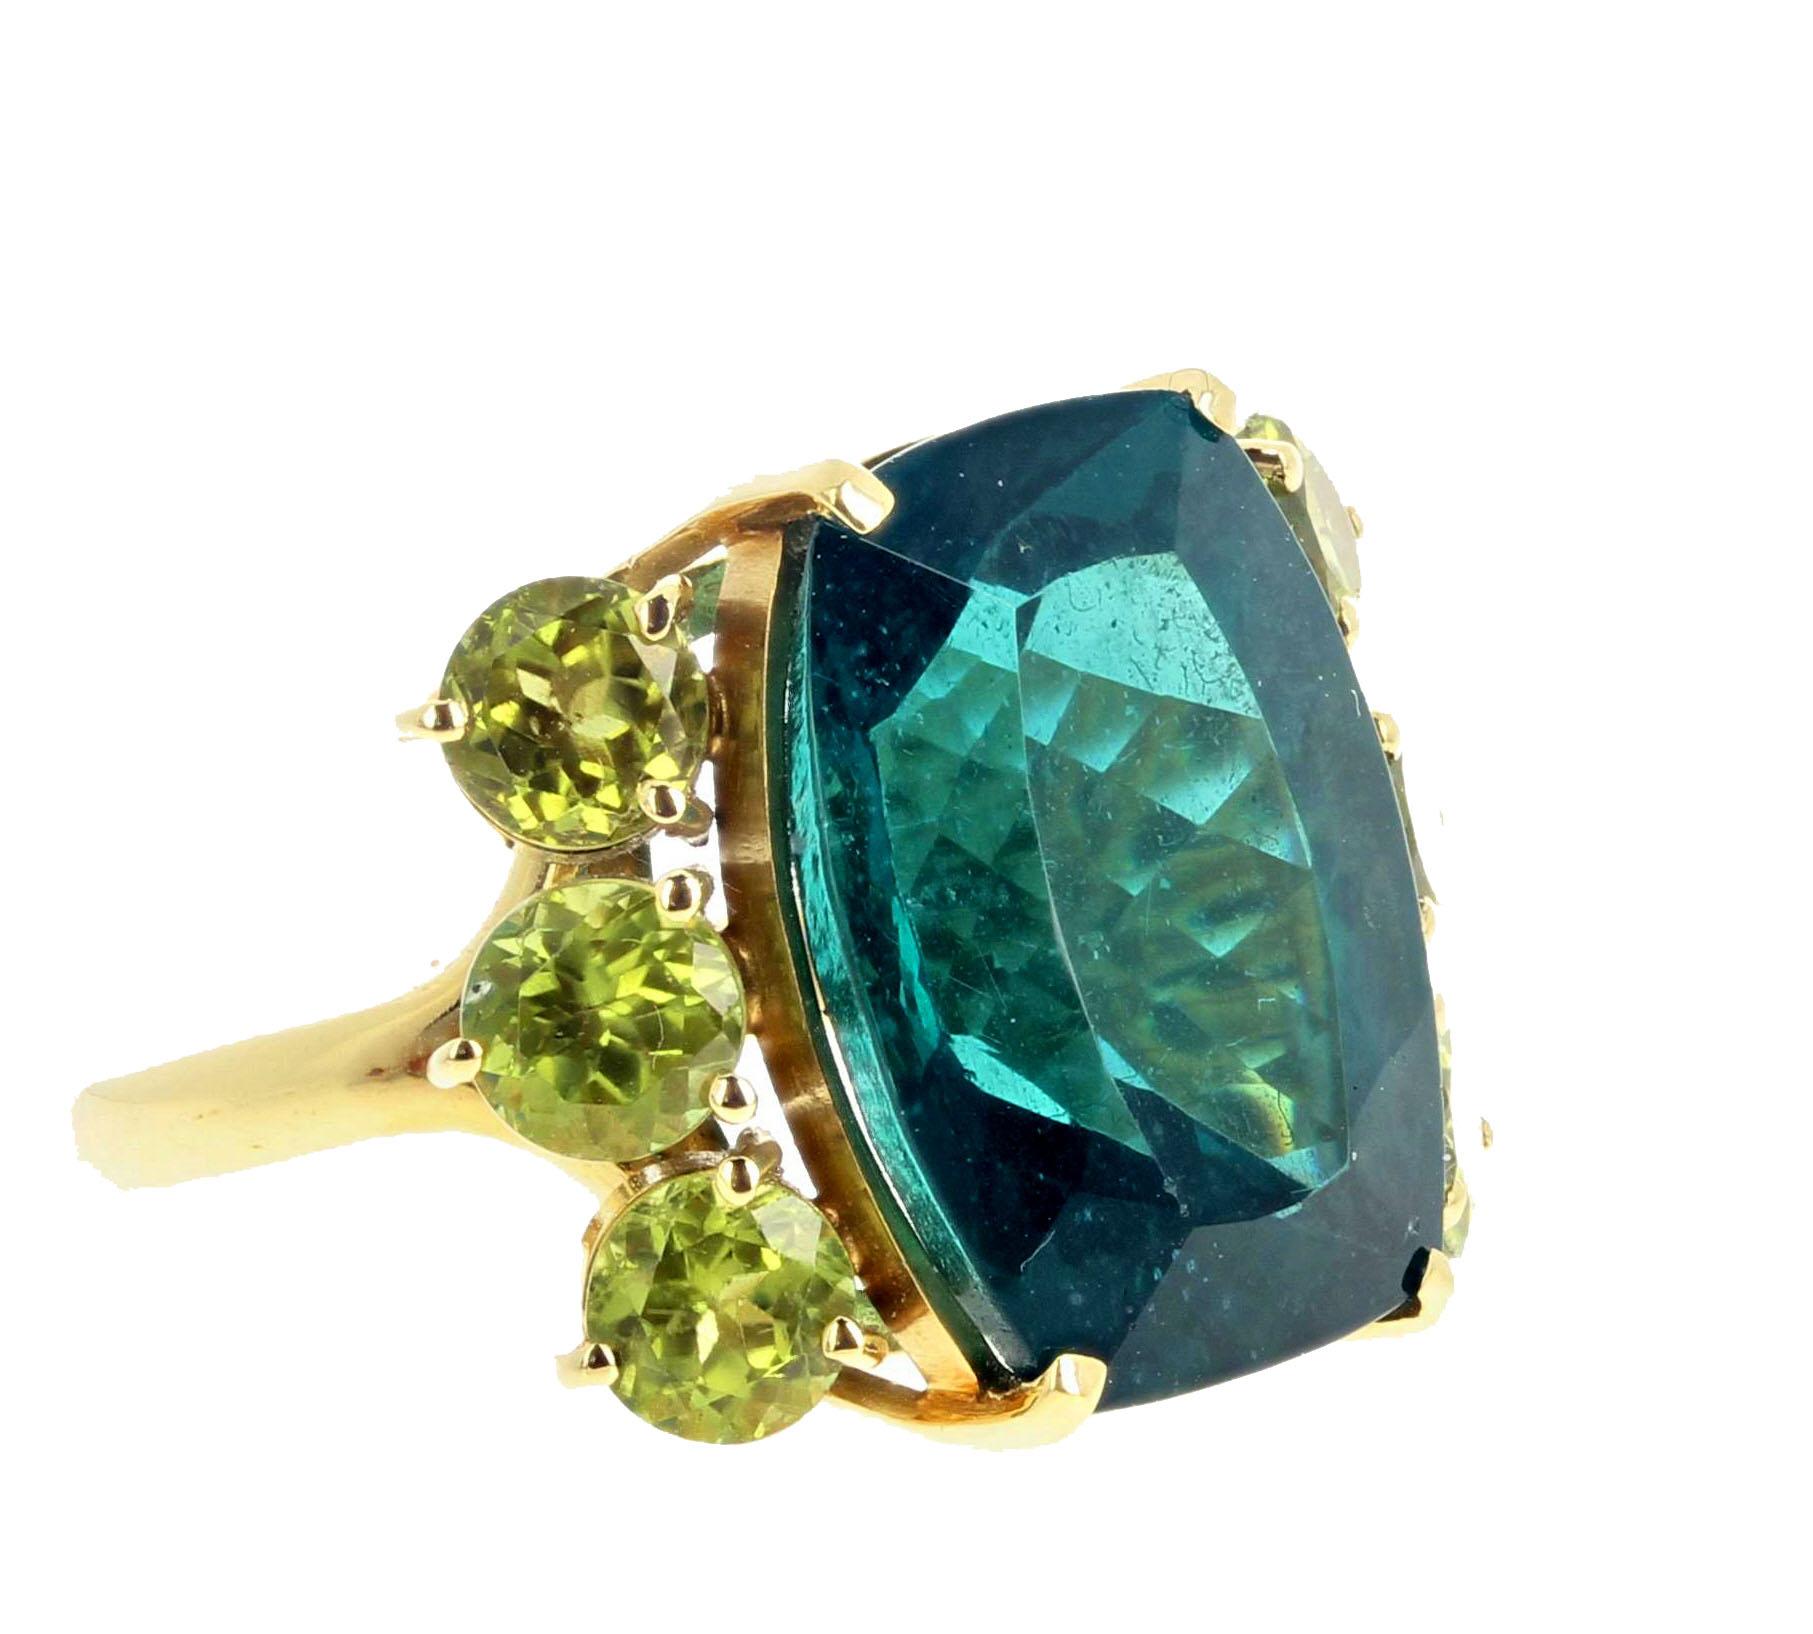 Exquisite rare and very large 18.8 Carat natural blue Indicolite Tourmaline enhanced with 6 glittering natural Peridots (0.30 carats each) set in 18Kt yellow gold ring size 7 (sizable). There are no eye visible inclusions in this gorgeous